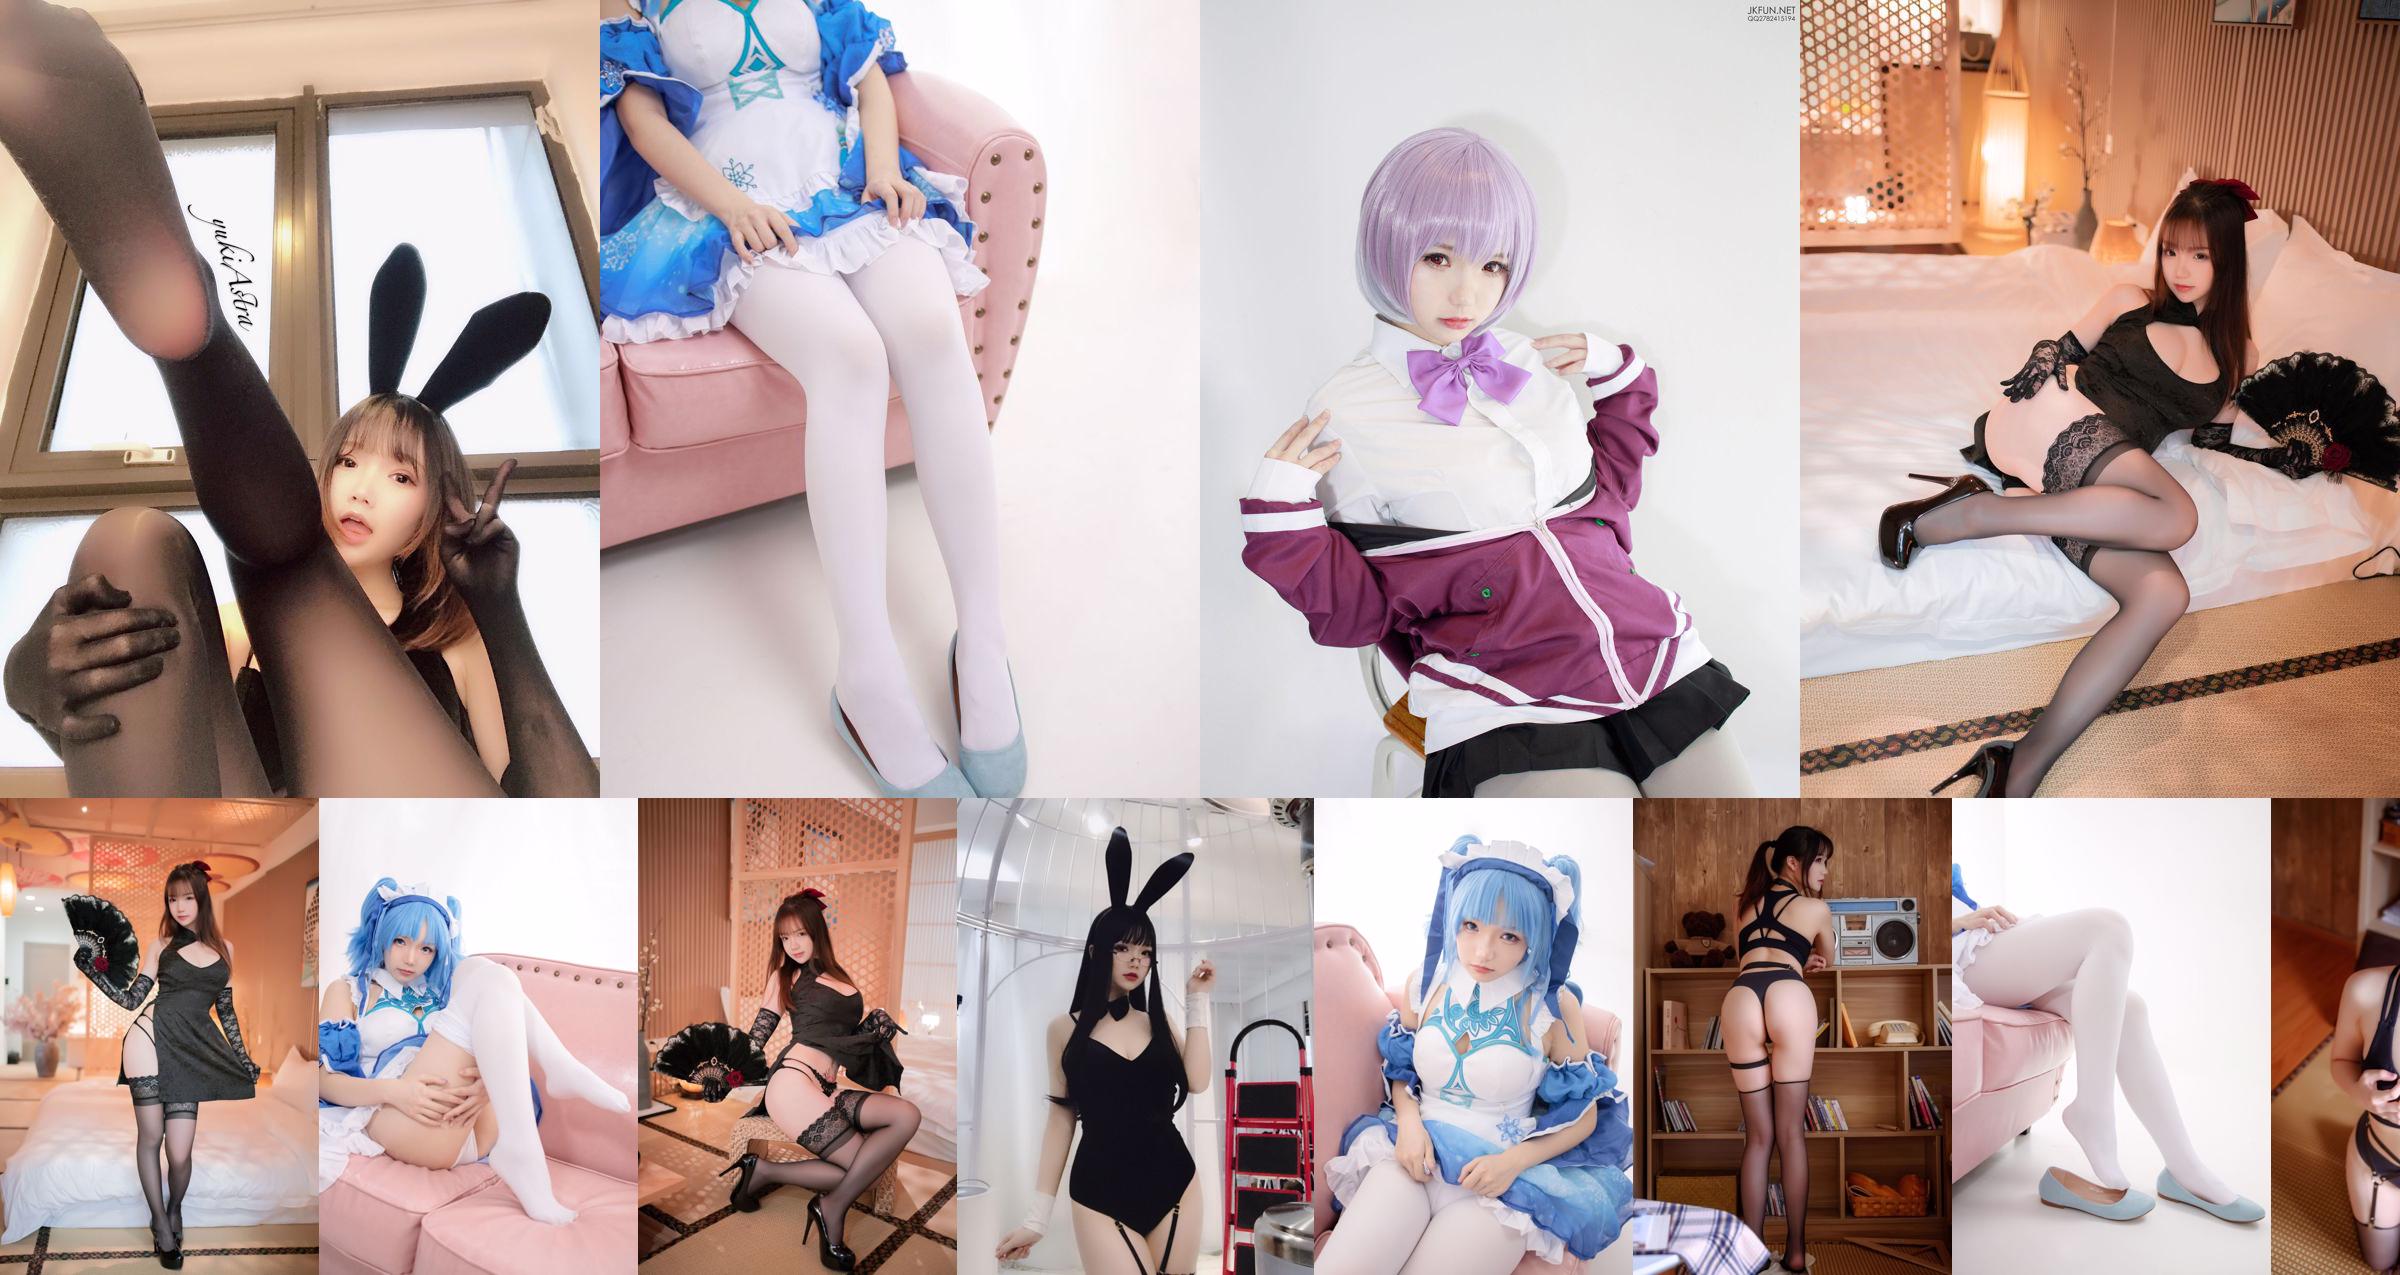 [Beauty Coser] Xueqing Astra "Sports Elements" No.7a9109 หน้า 1